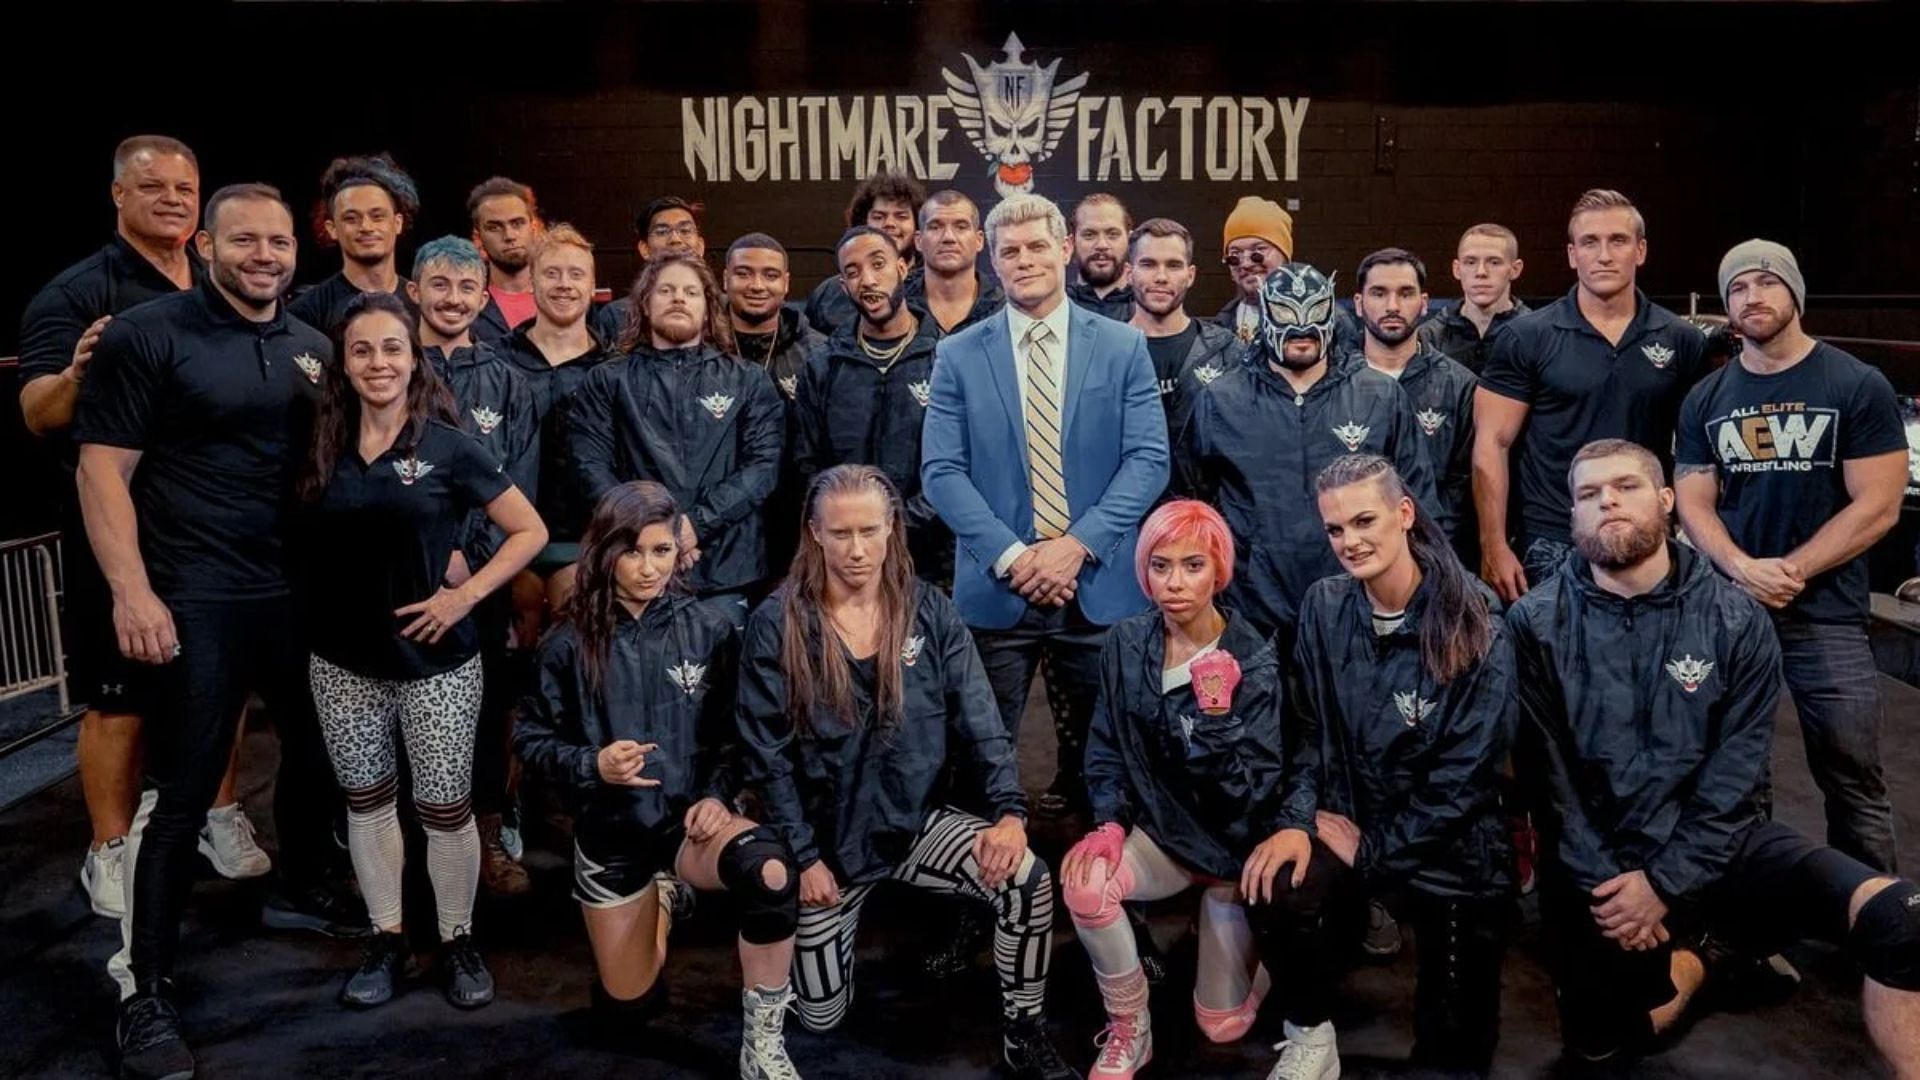 Rhodes and other AEW staff with some students of the Nightmare Factory.